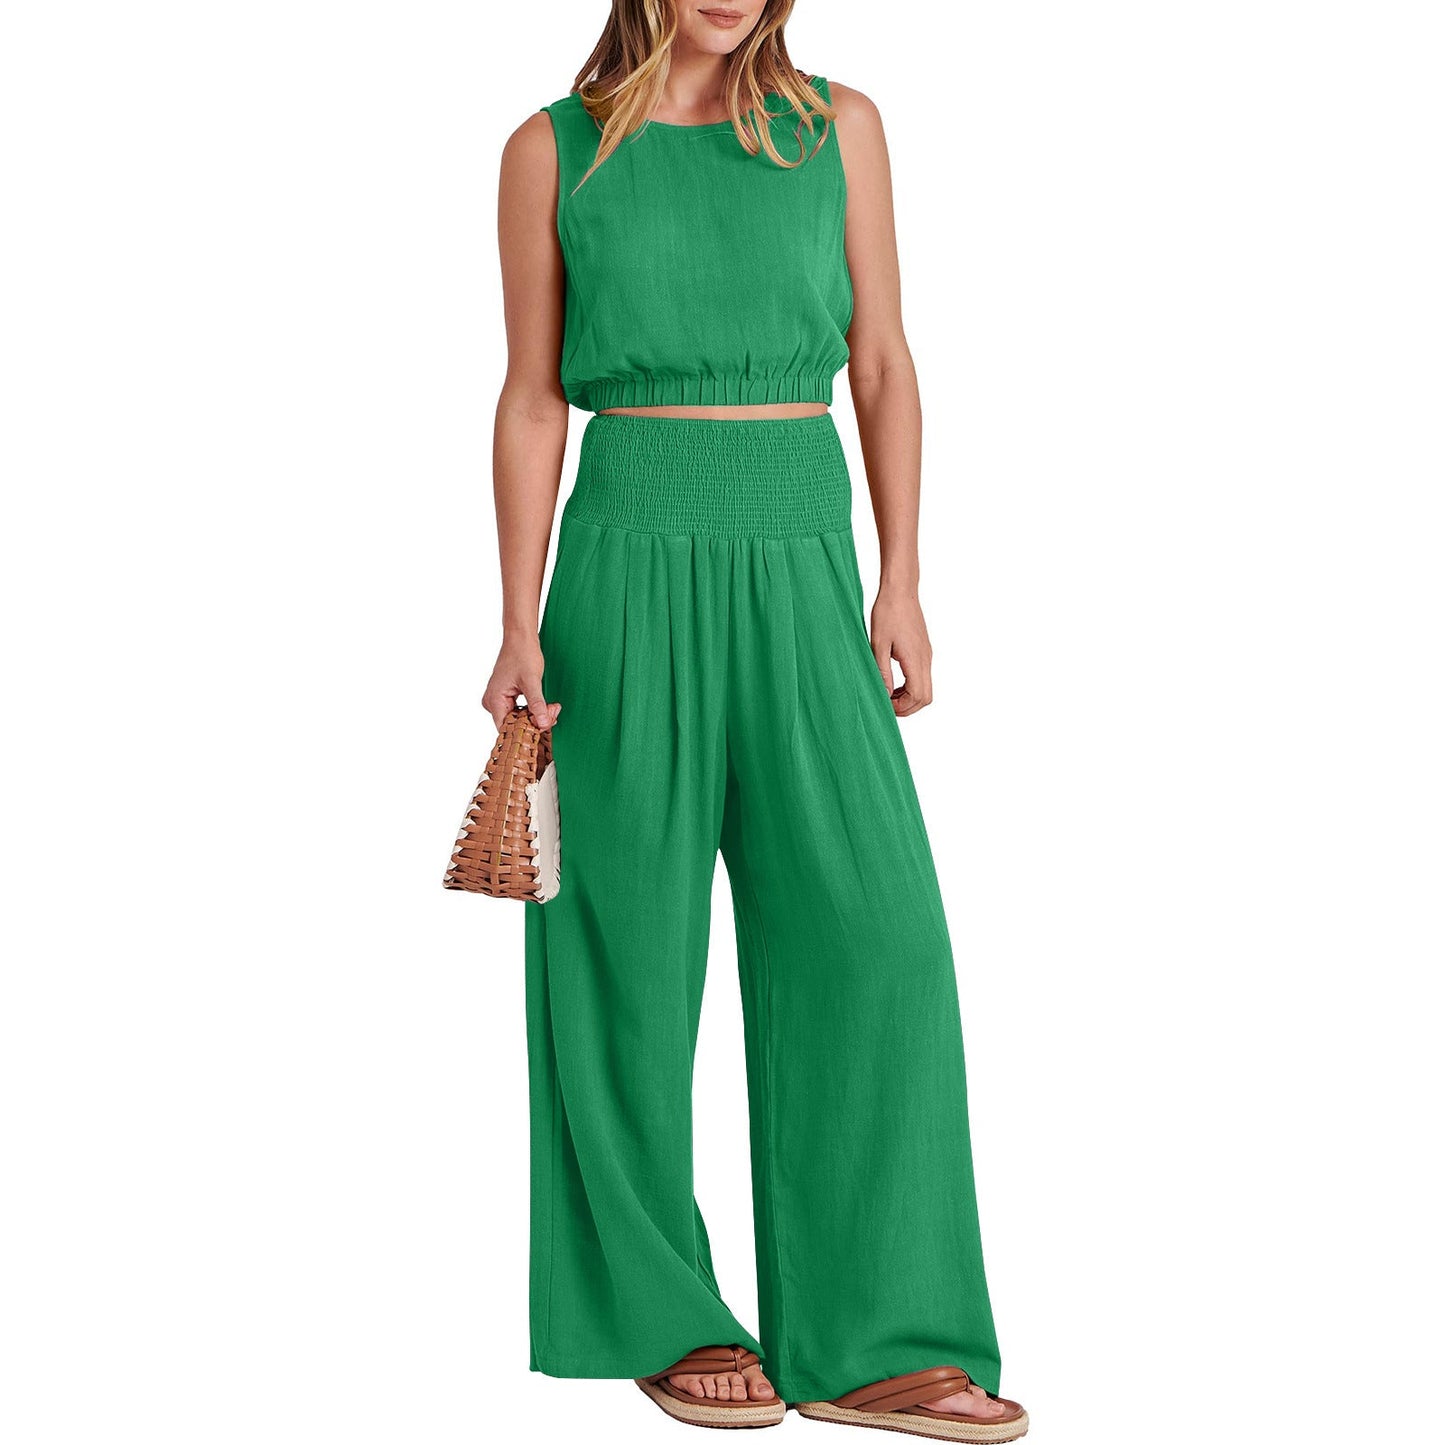 NTG Fad SUIT 898# Green 159 / S Sleeveless Top and Pants Set